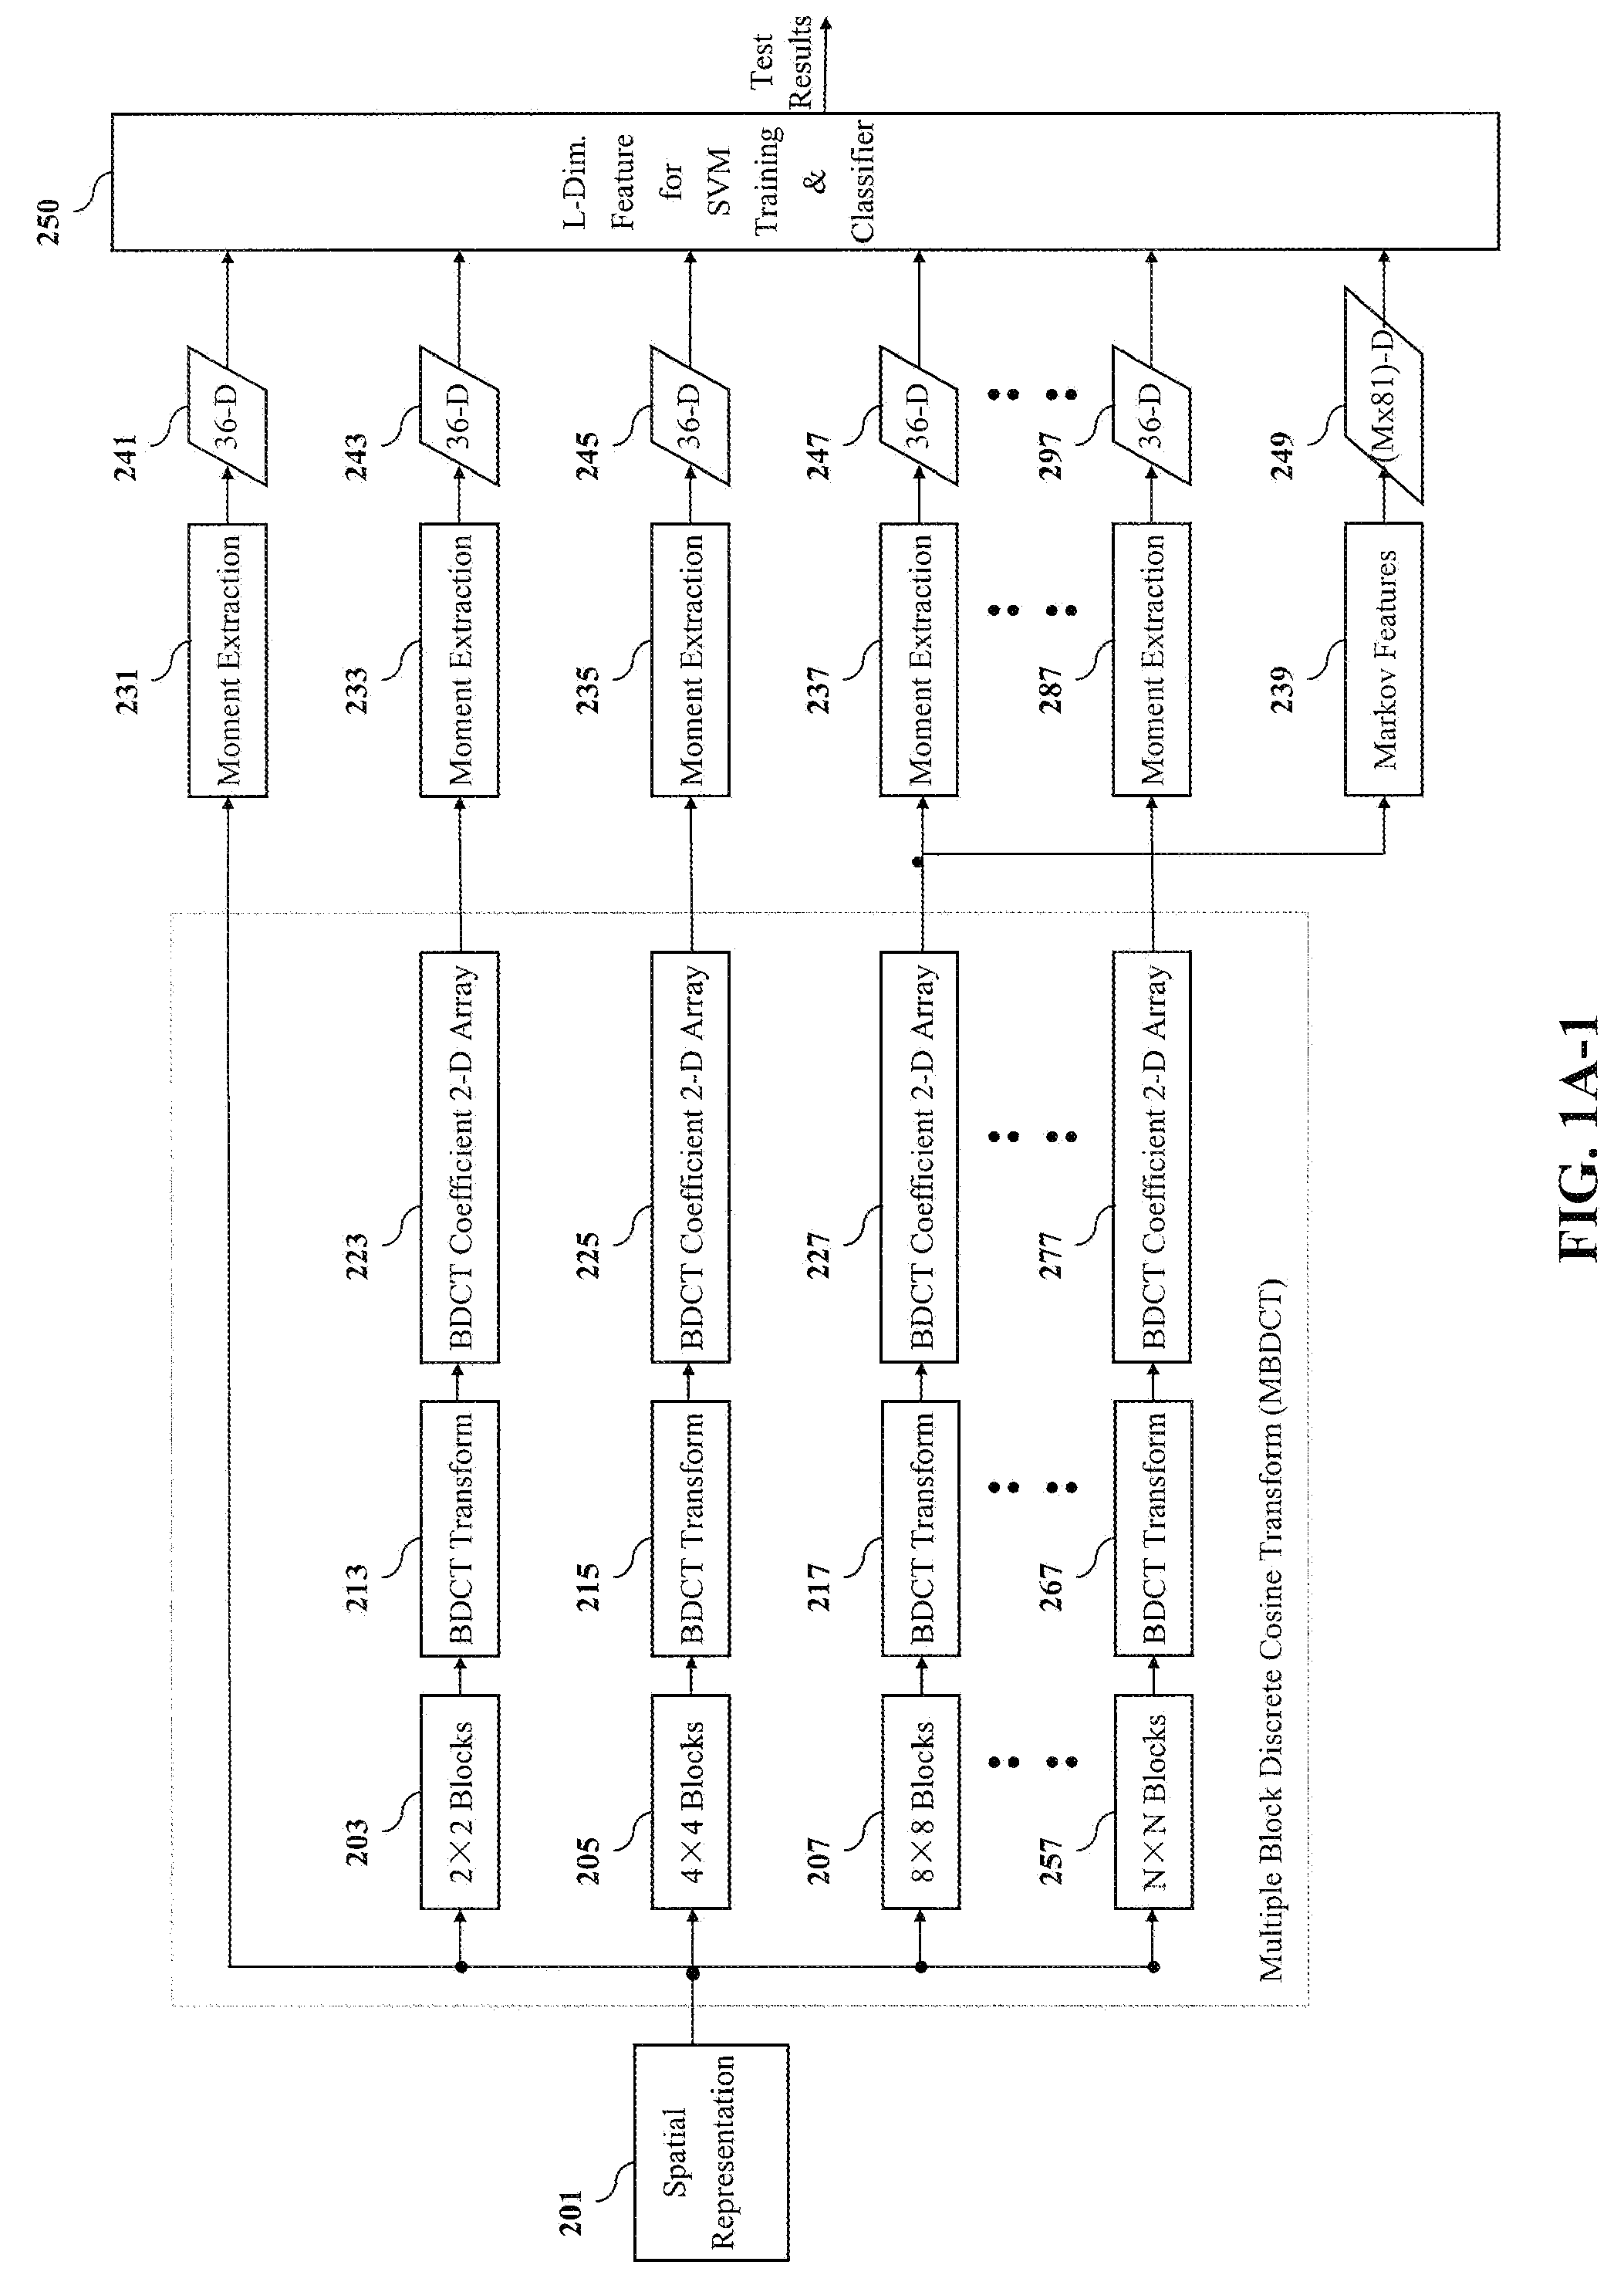 Method and apparatus for a natural image model based approach to image splicing/tampering detection